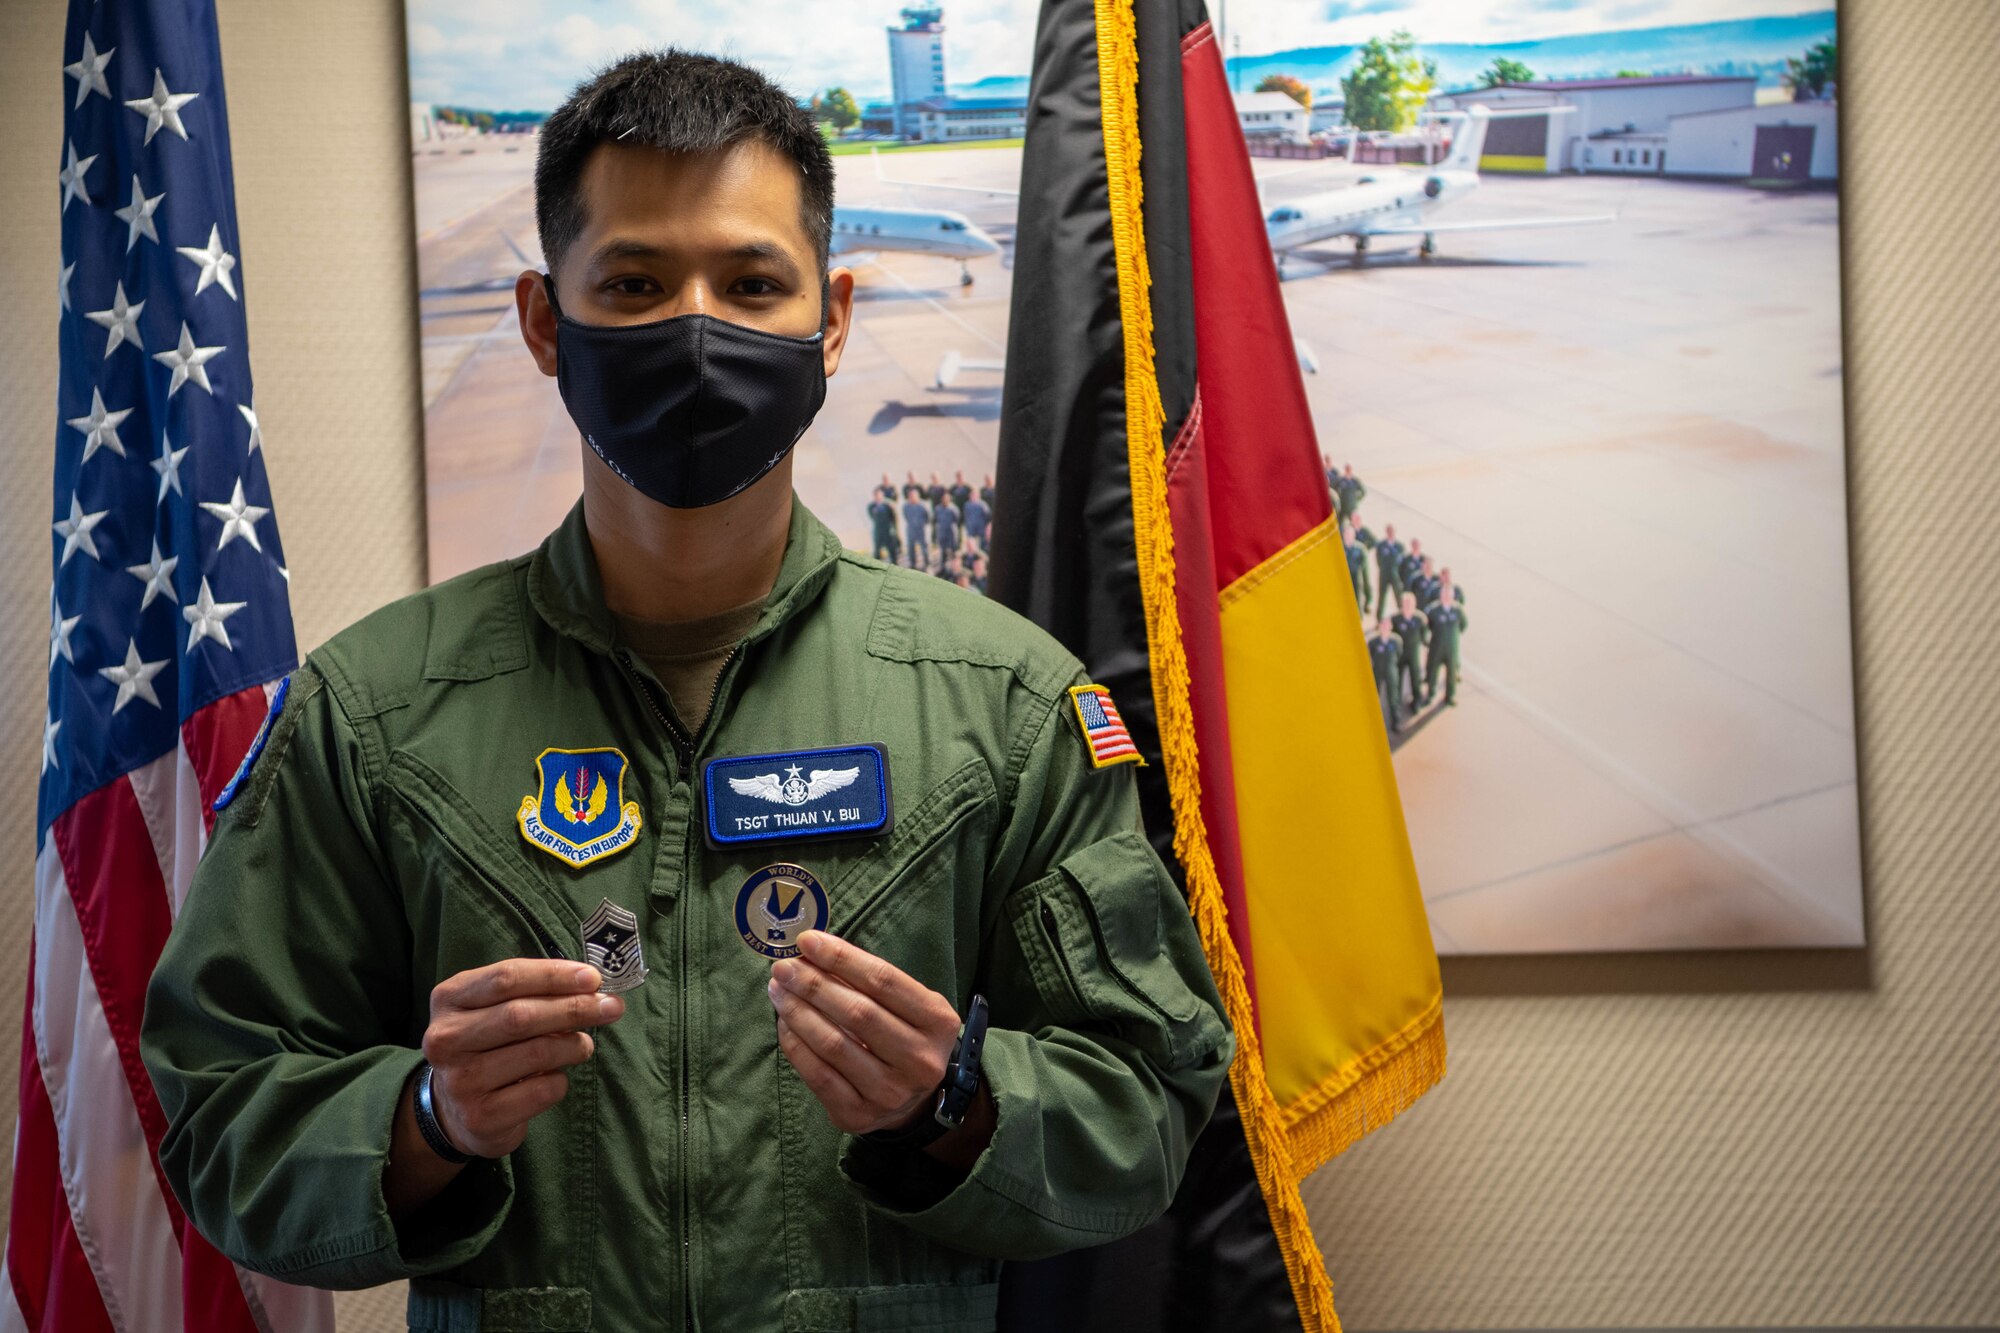 An Airman holding two coins.